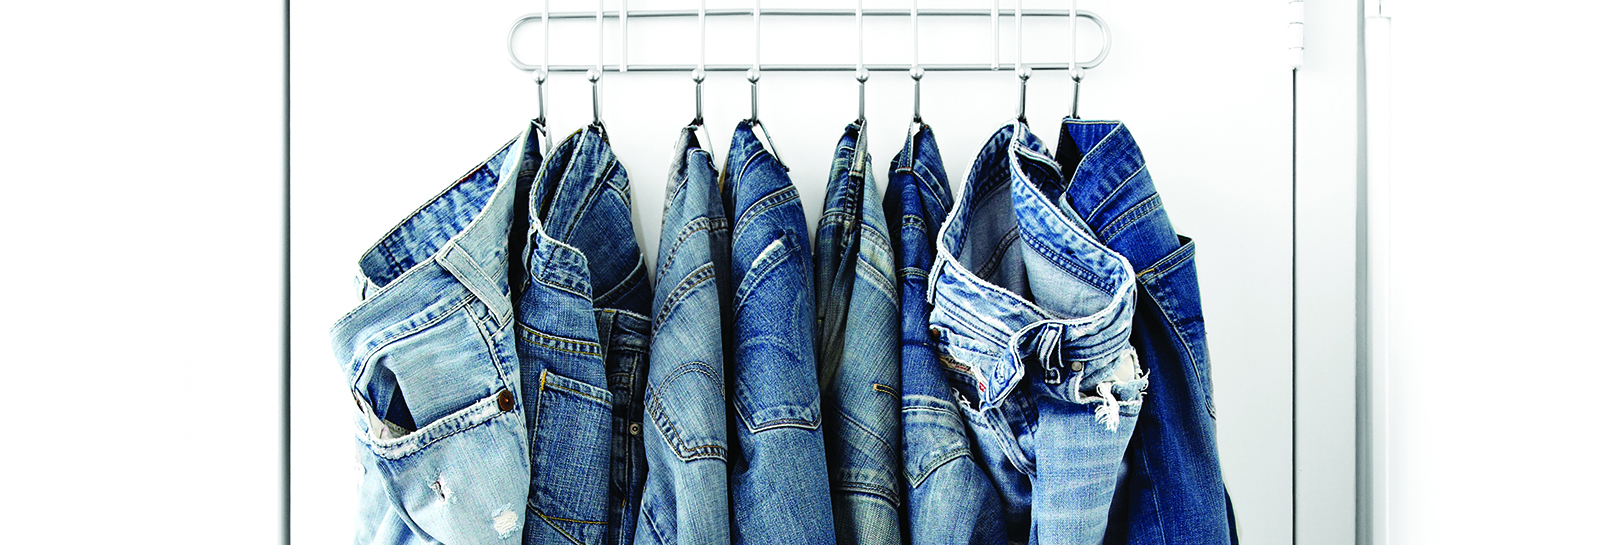 multiple jeans hung up on a hanger